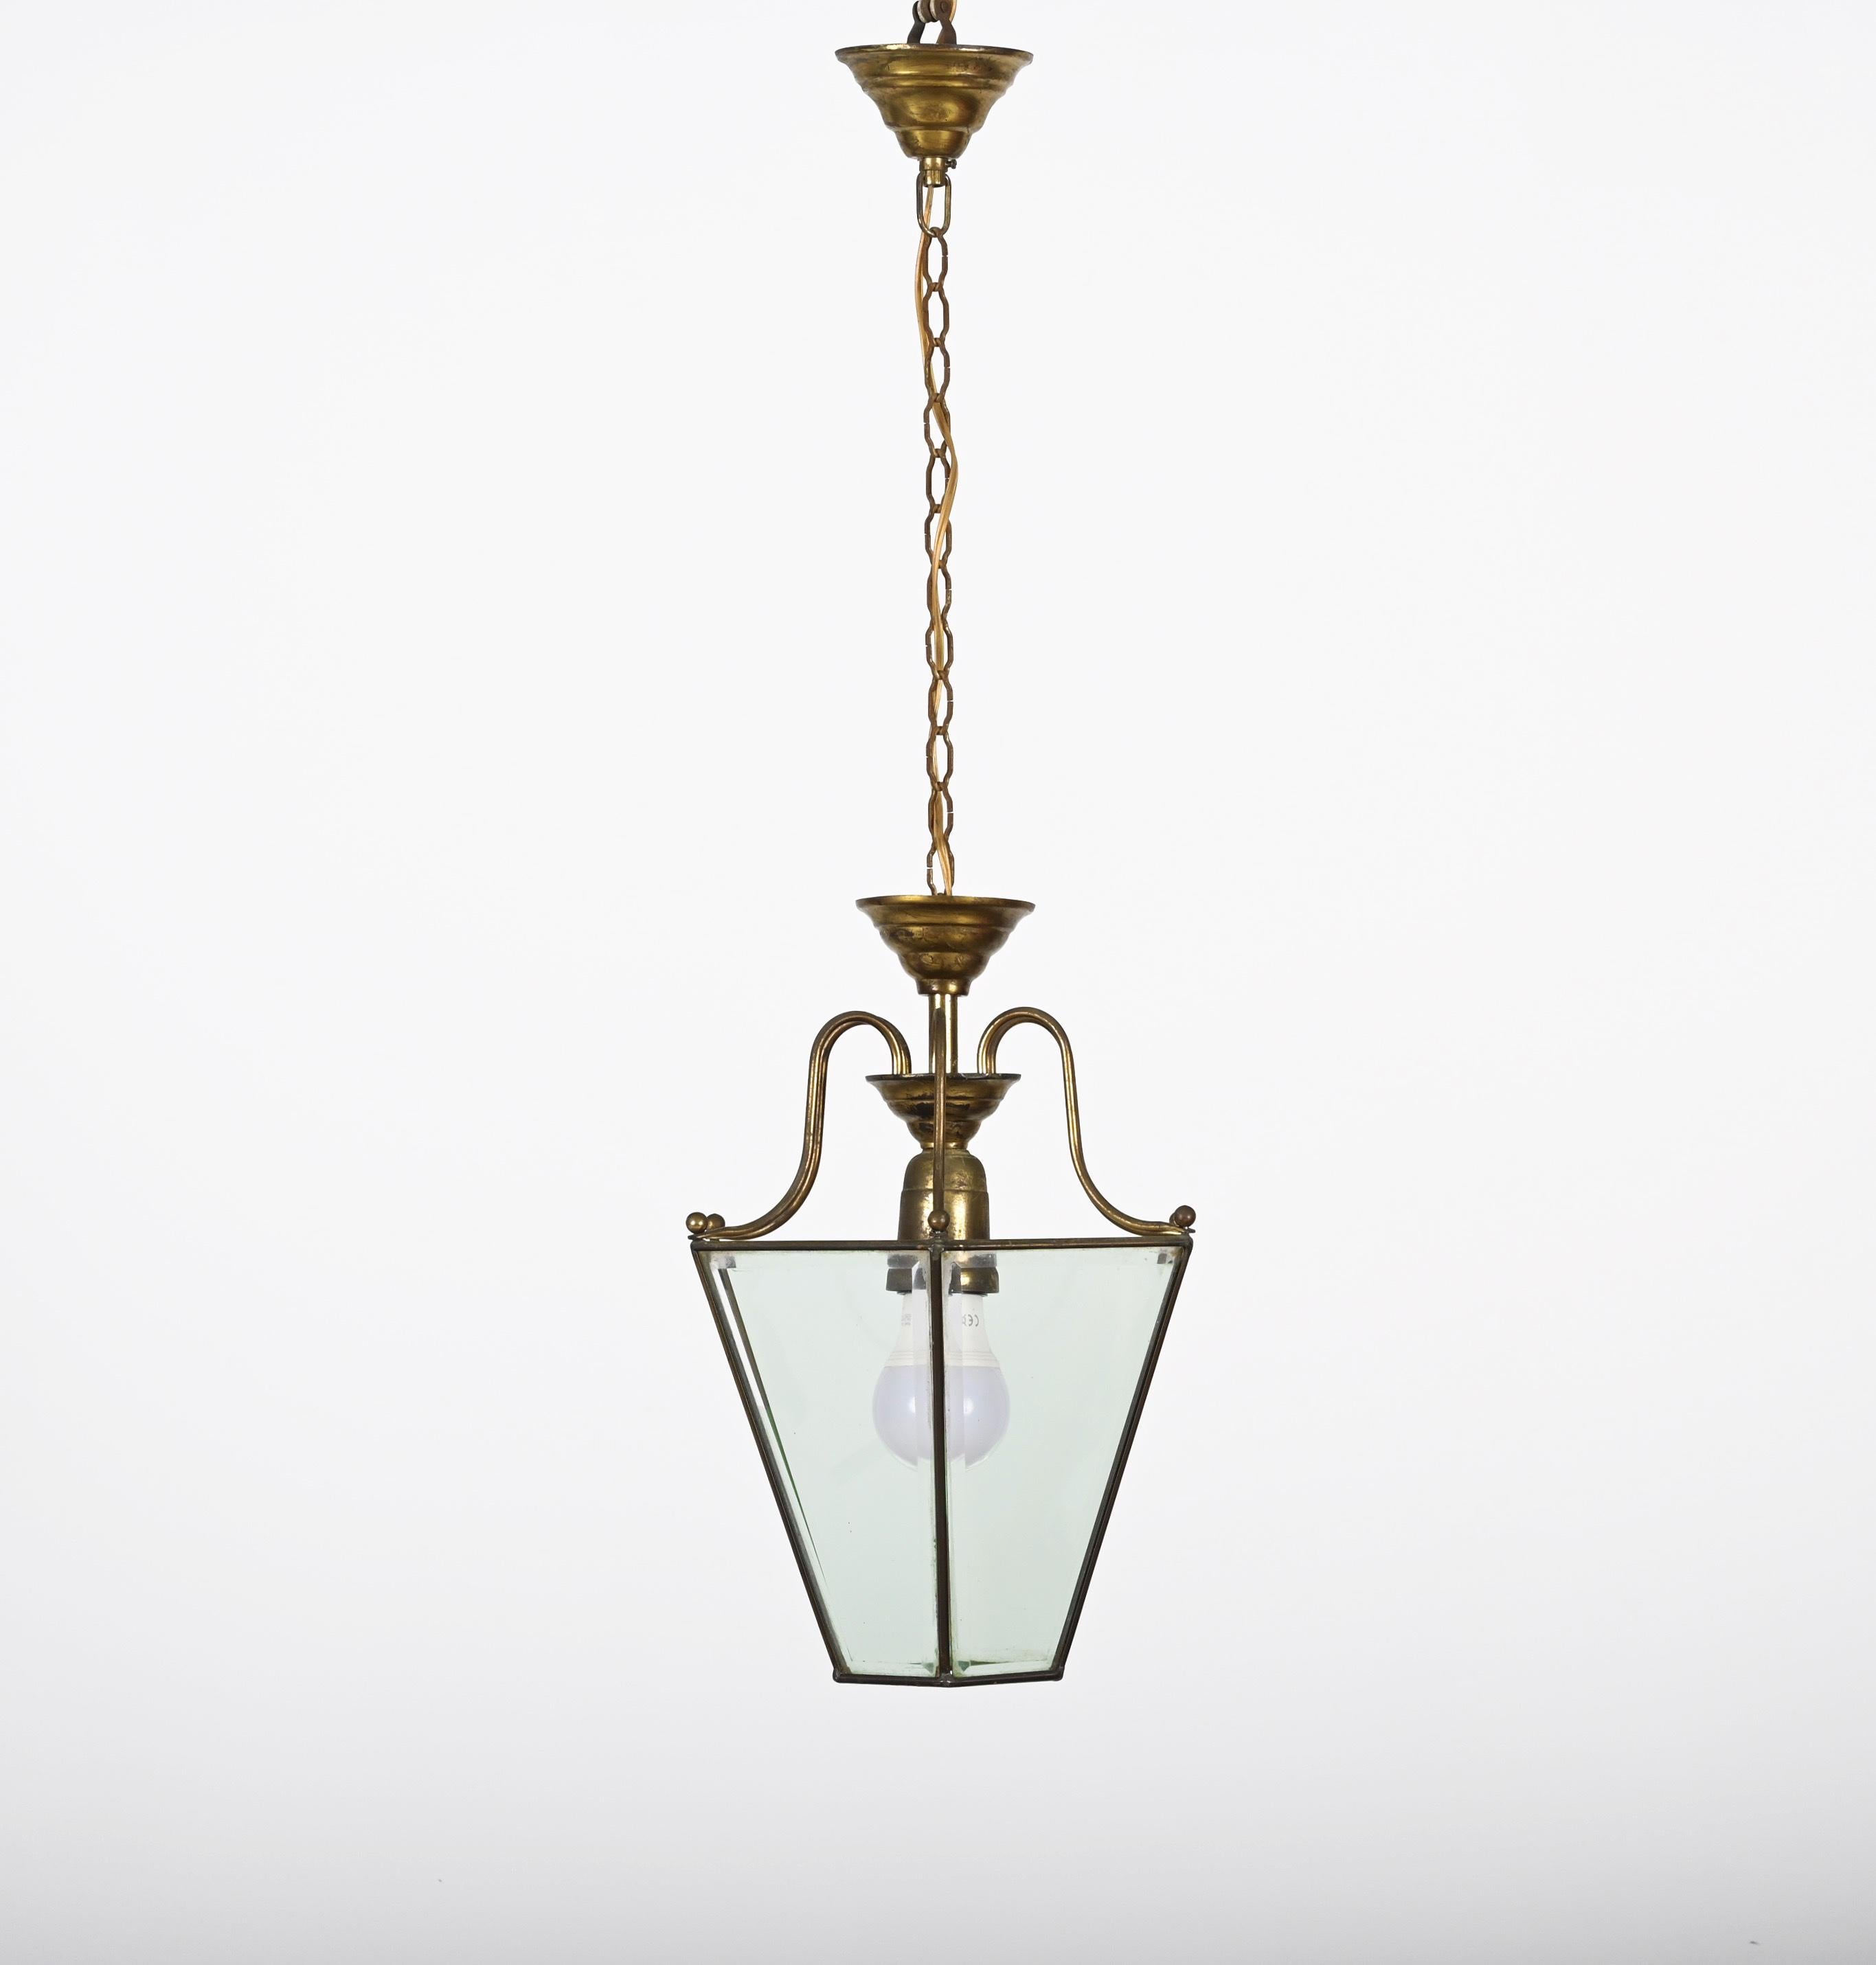 20th Century Brass and Beveled Glass Hexagonal Italian Chandelier After Adolf Loos, 1950s For Sale